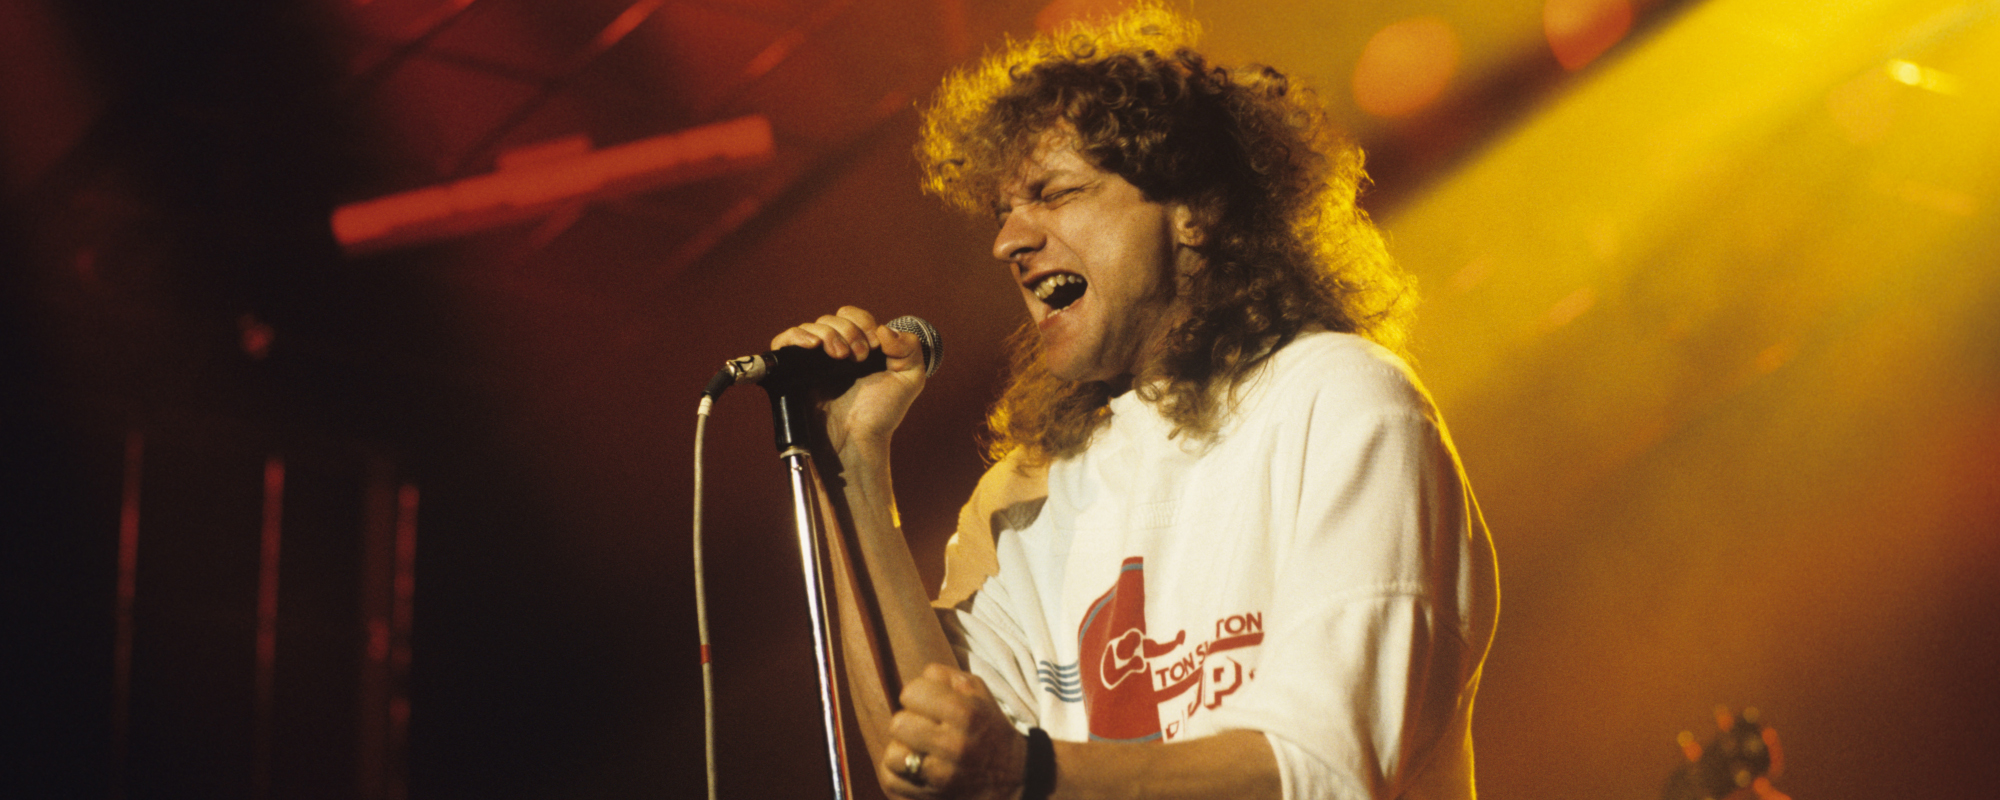 What are Foreigner’s 5 Biggest Hits?